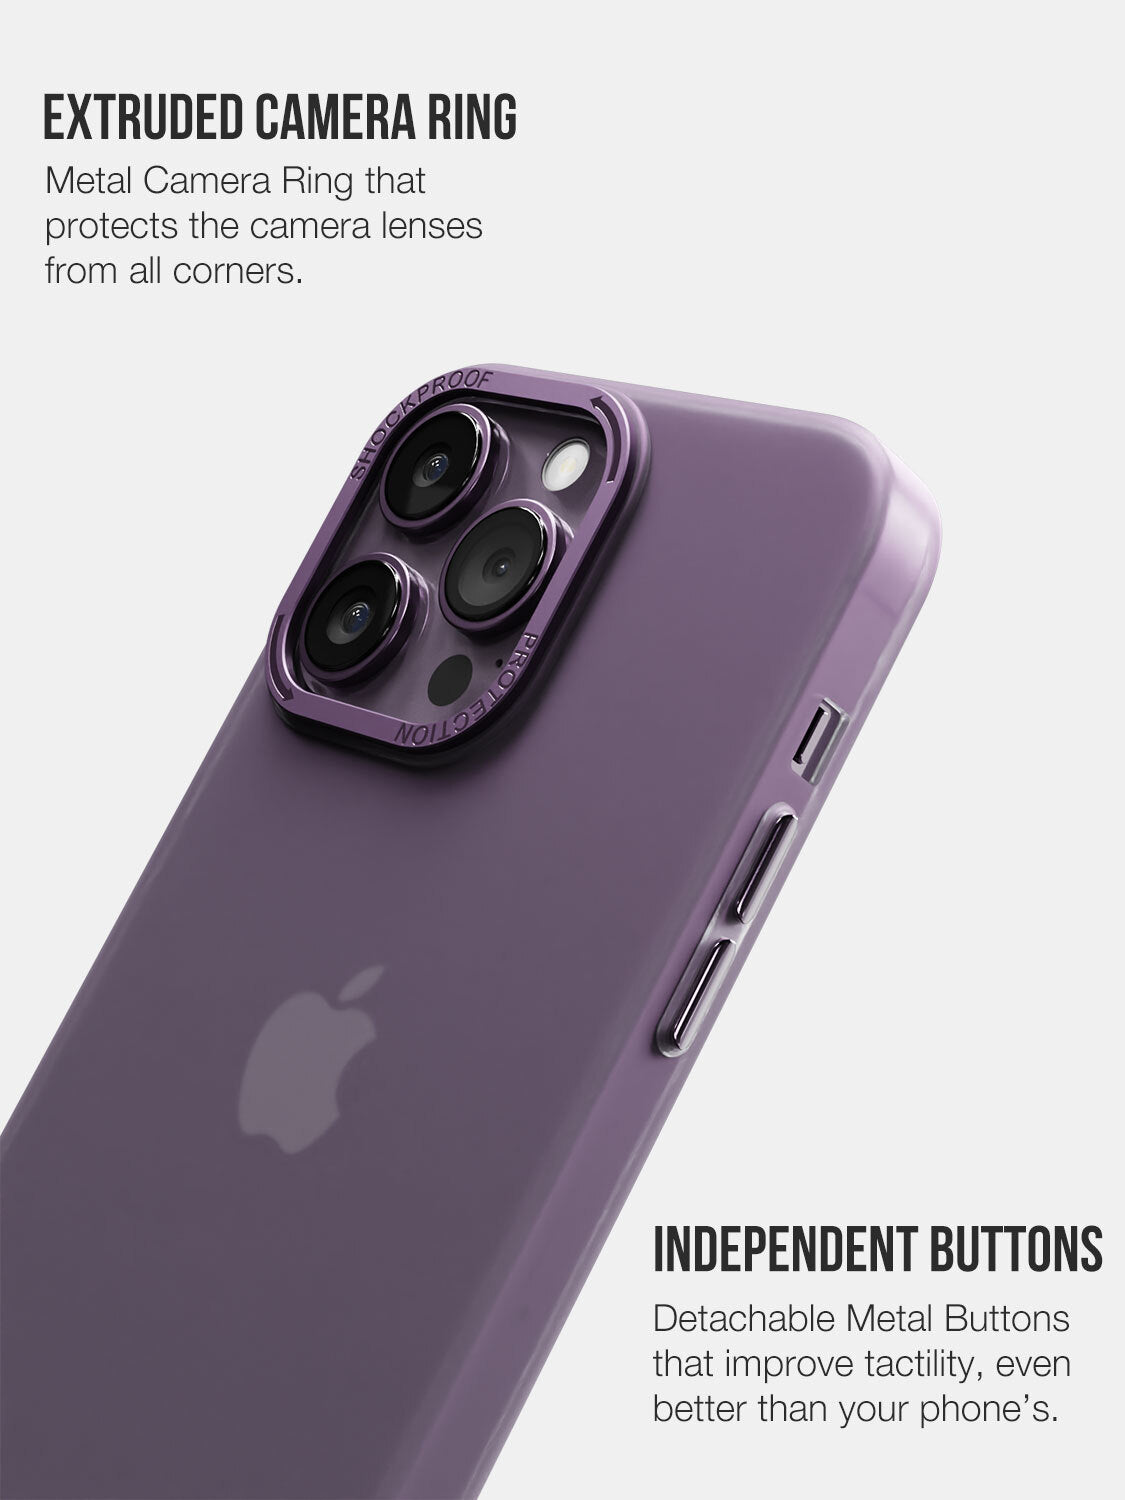 iphone 14 pro max case with screen protection , iphone 14 pro max back cover with screen protection , iphone 14 pro max case with camera protection , iphone 14 pro max cases and covers with metal ring , iphone 14 pro max back cover with metal ring